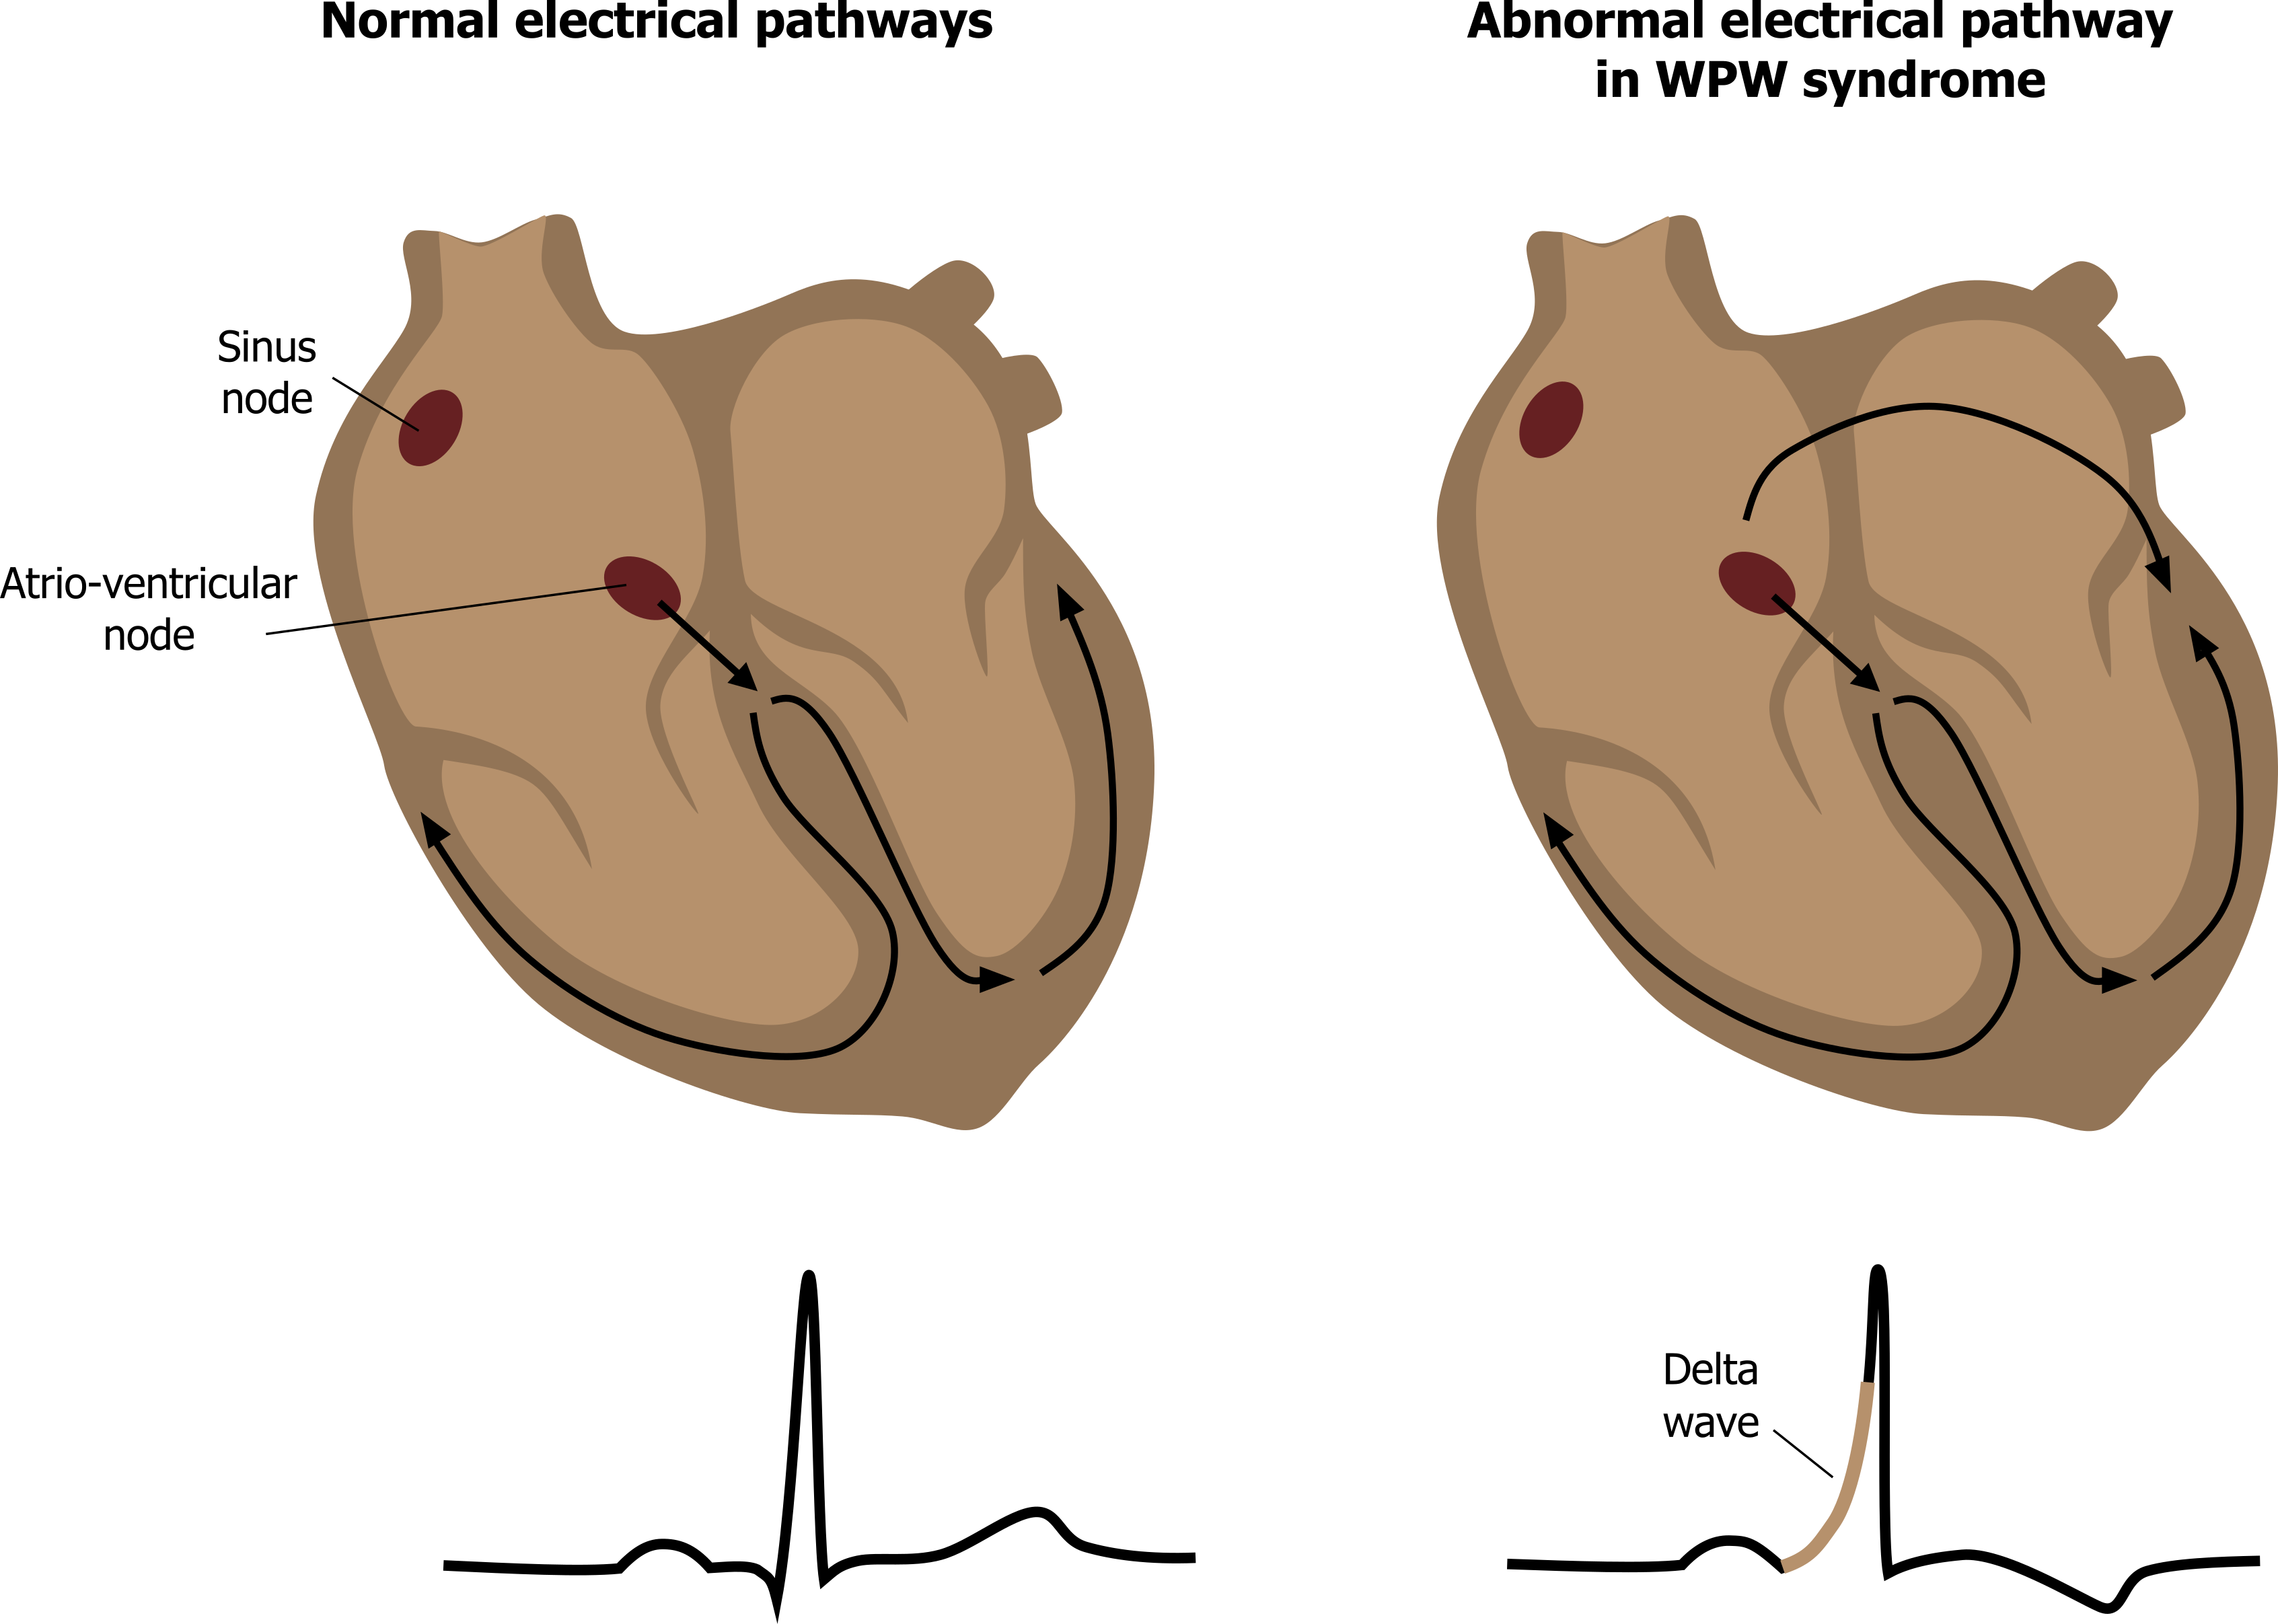 Two diagrams of the conductive pathways of the heart are shown. The first is normal, with an arrow showing normal transition of the action potential through the AV node into and around the ventricular myocardium. The second heart diagram shows two arrows from the AV node - one taking the normal conductive pathway into the ventricles, the other travelling across the atrium and passing through the atrial-ventricular septum through an aberrant pathway into the ventricles. This aberrant pathway causes the WPW syndrome. ECGs below each heart diagram show a normal ECG associated with the normal conductive pathway, but with the WPW pathway the associated ECG shows a delta wave which is seen as a slower rise to the QRS complex compared to the sharp depolarization seen in the normal ECG.